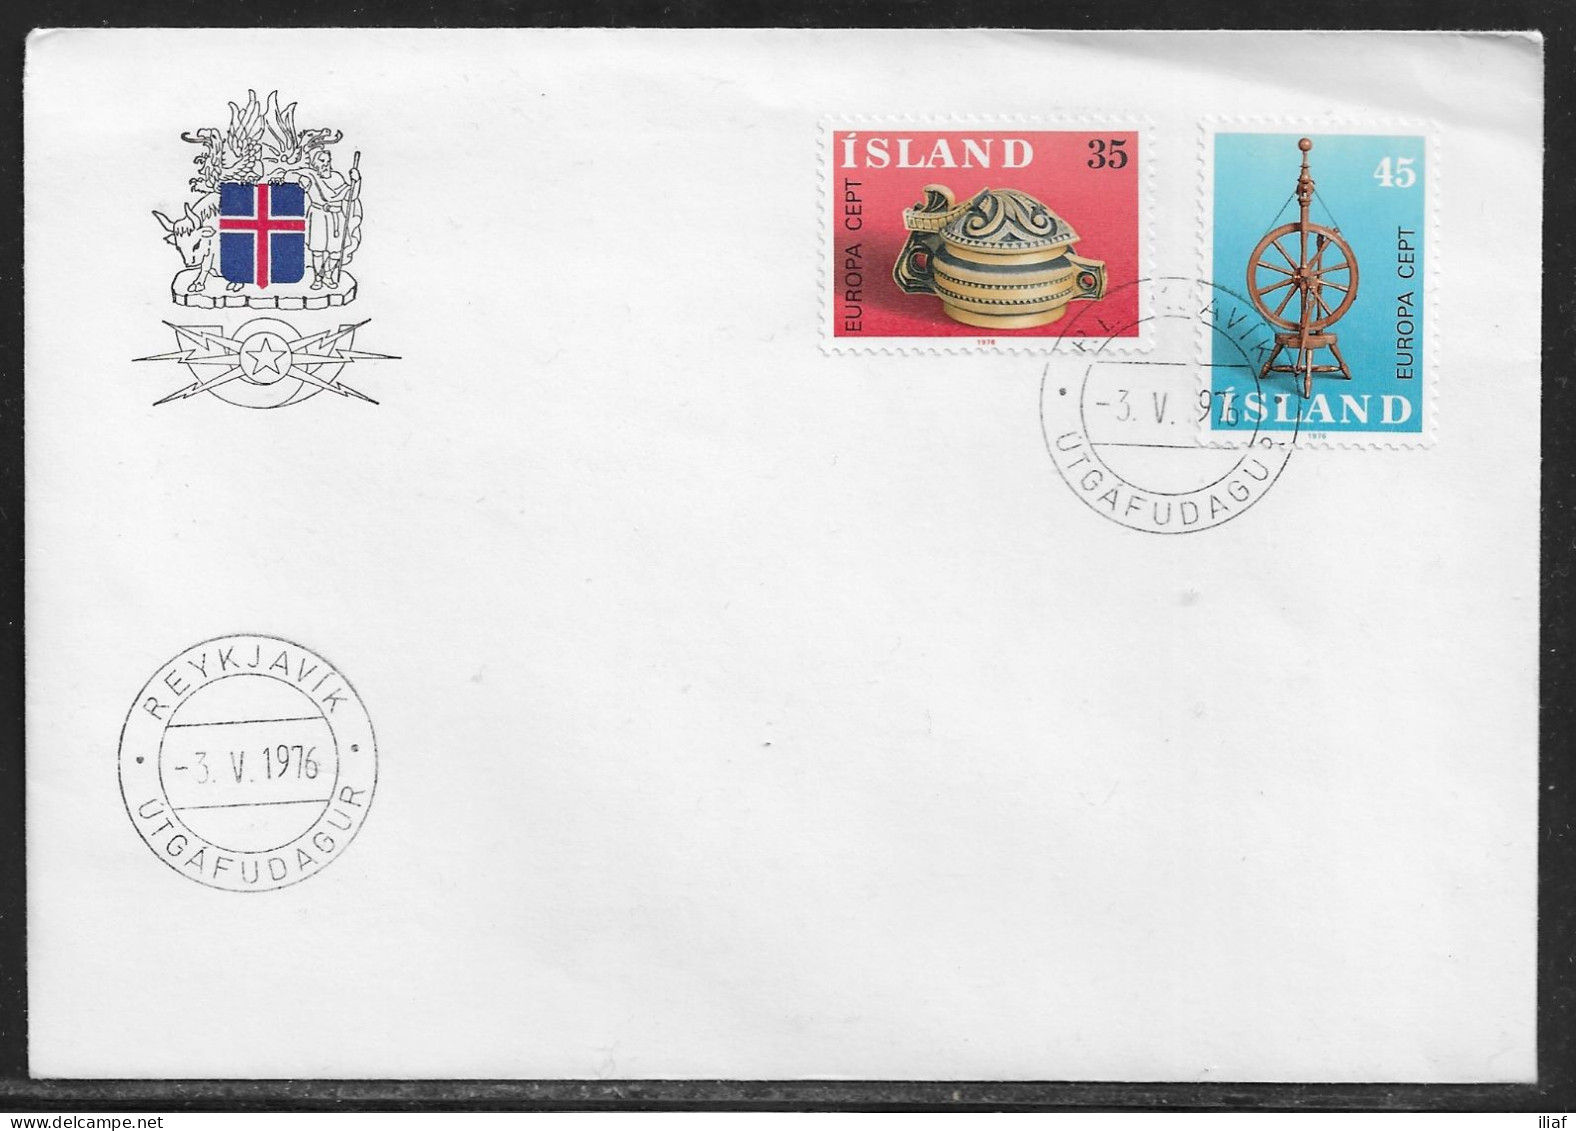 Iceland. FDC Sc. 490-491.   EUROPA Stamps - Handicrafts.  FDC Cancellation On Special Envelope - FDC